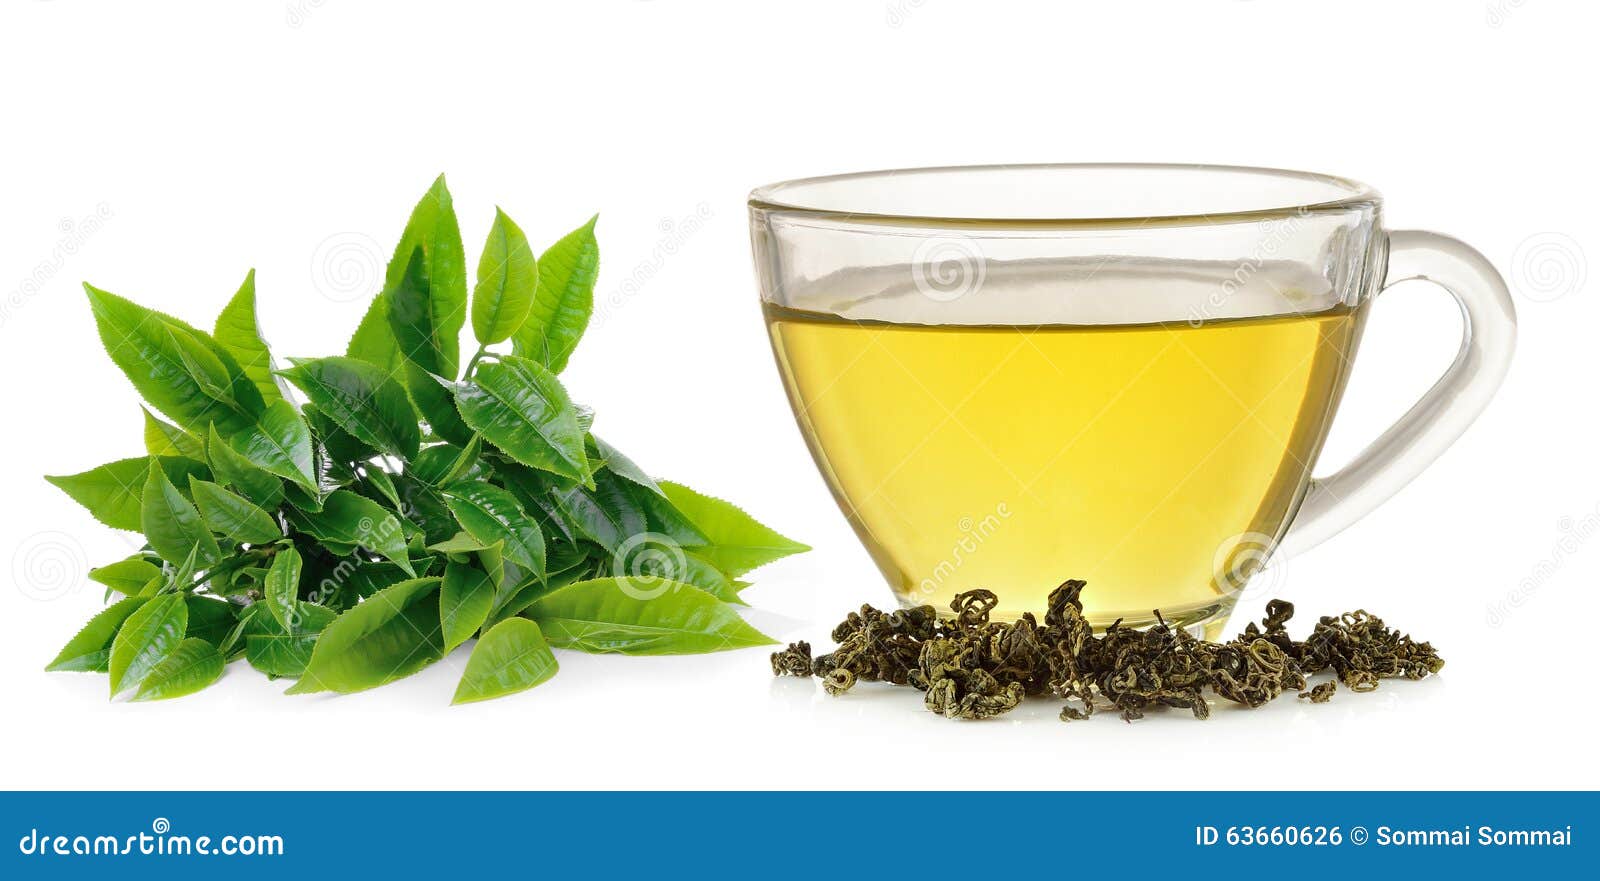 https://thumbs.dreamstime.com/z/glass-cup-green-tea-white-background-63660626.jpg